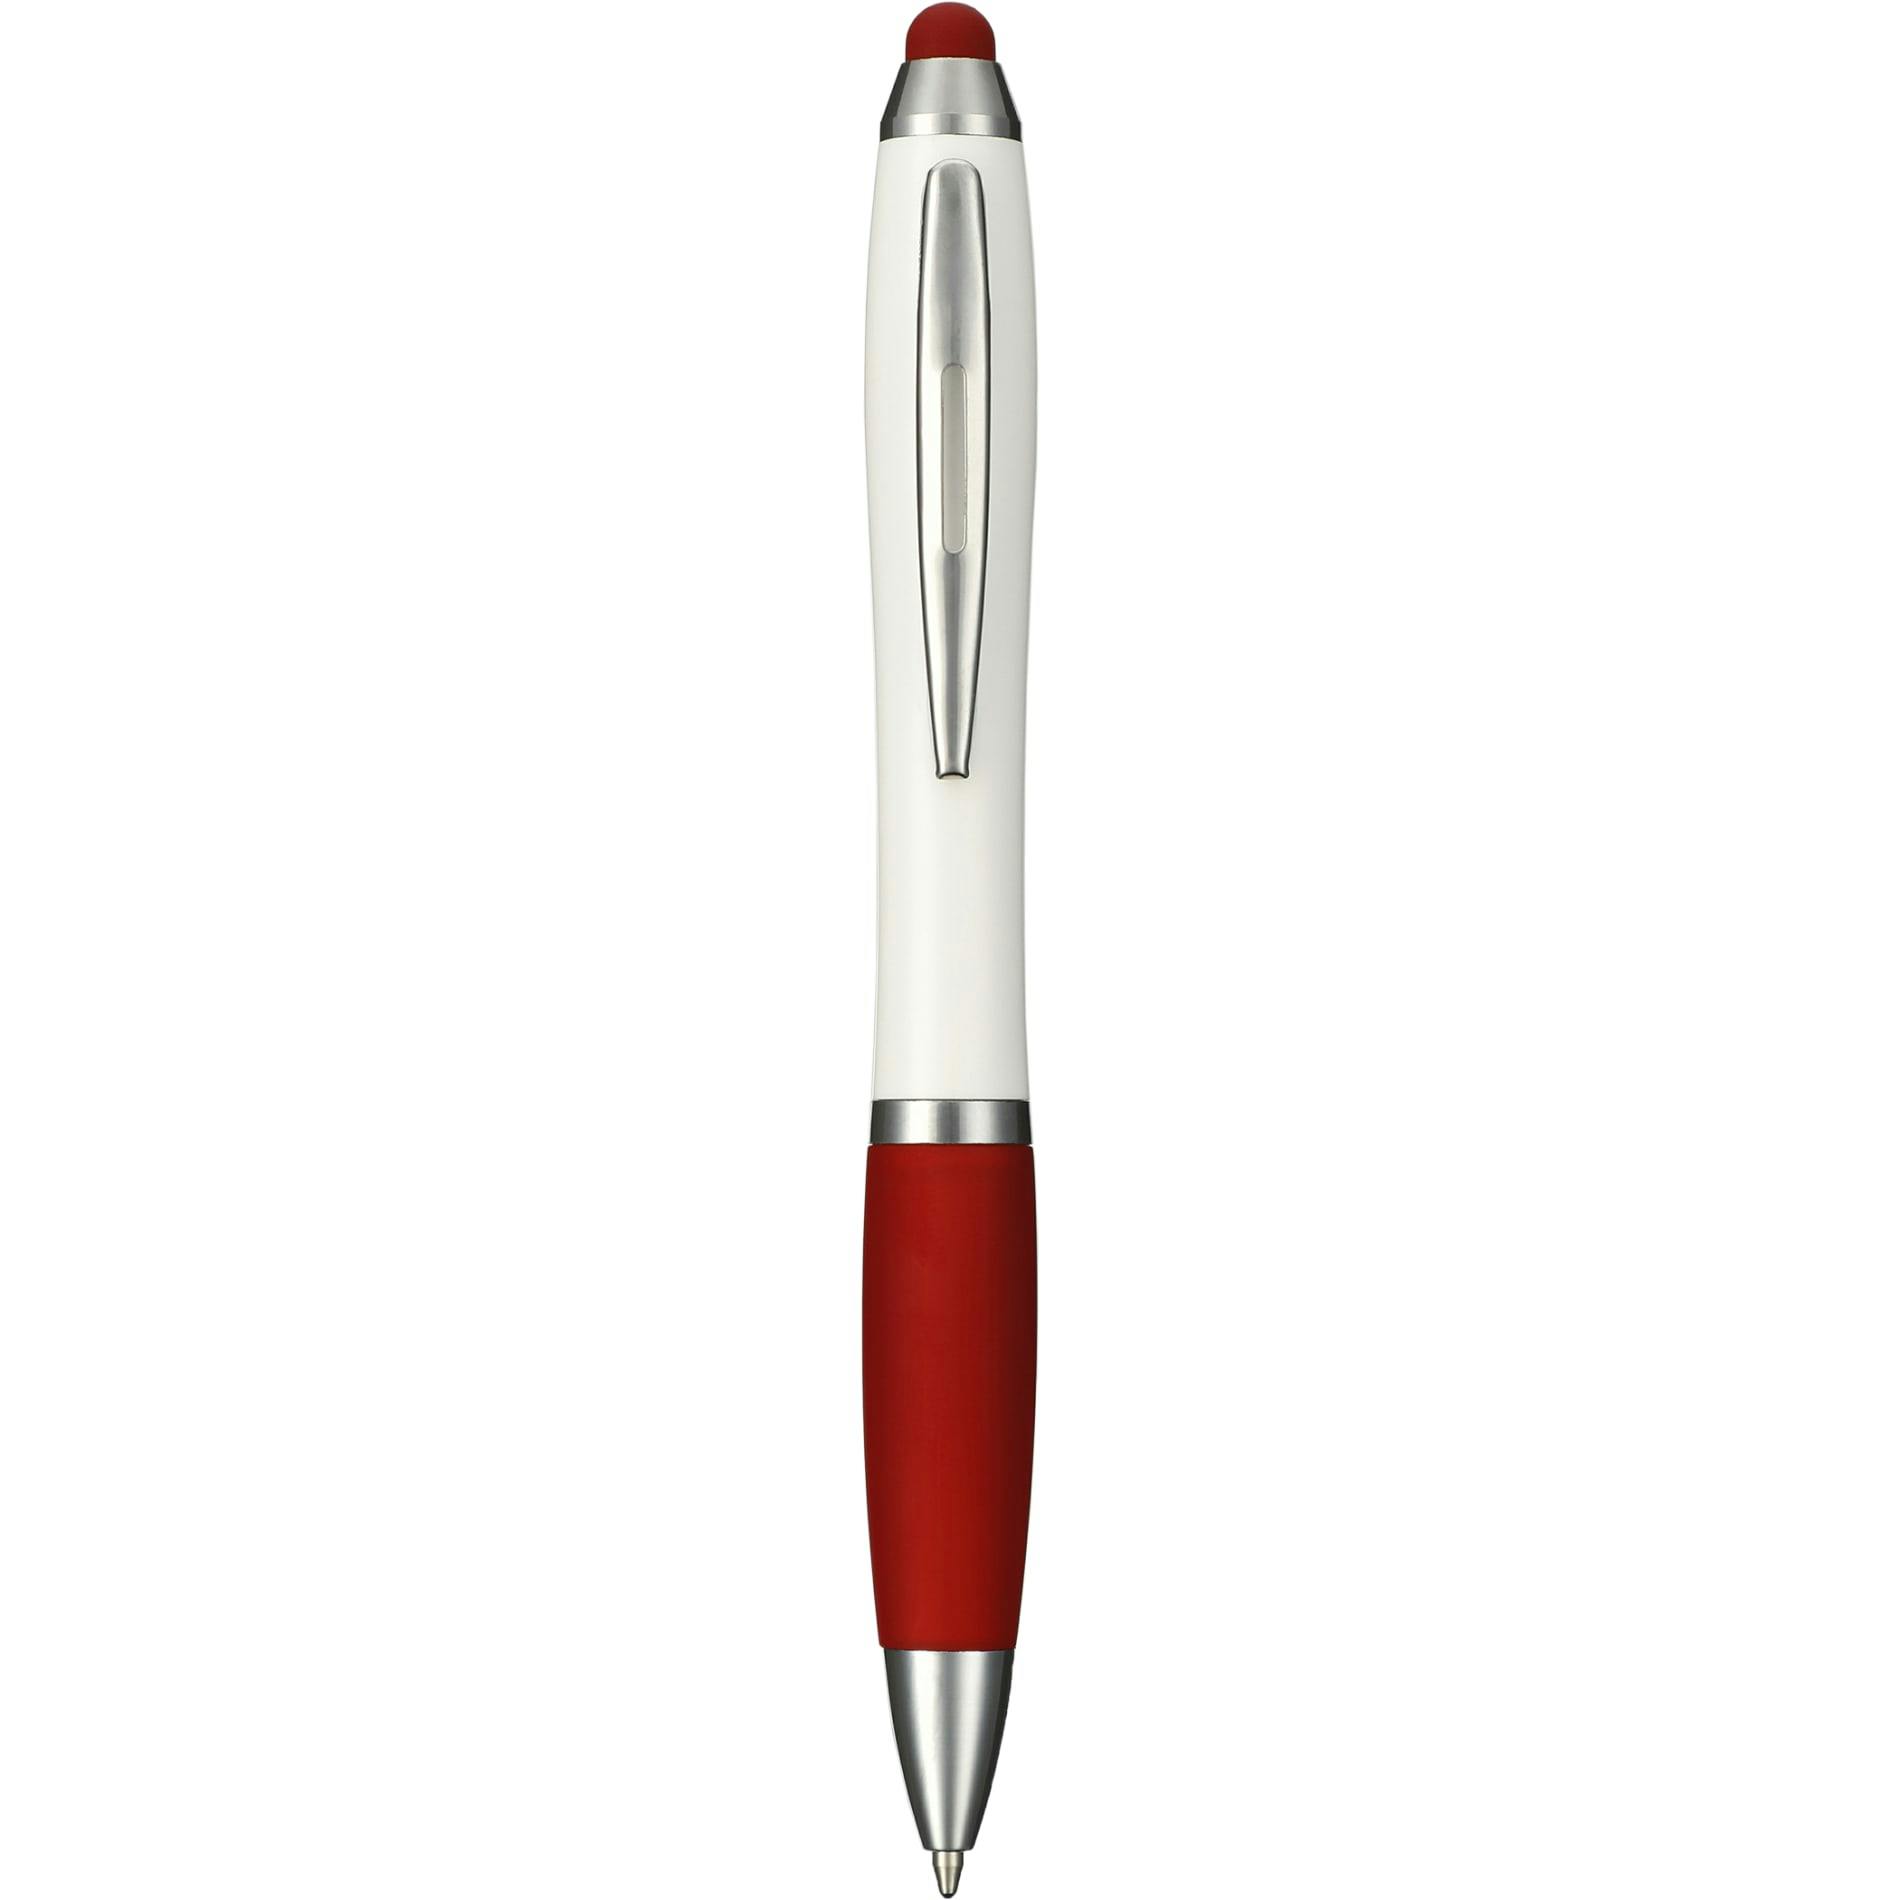 Nash Ballpoint Stylus with Antimicrobial Additive - additional Image 3